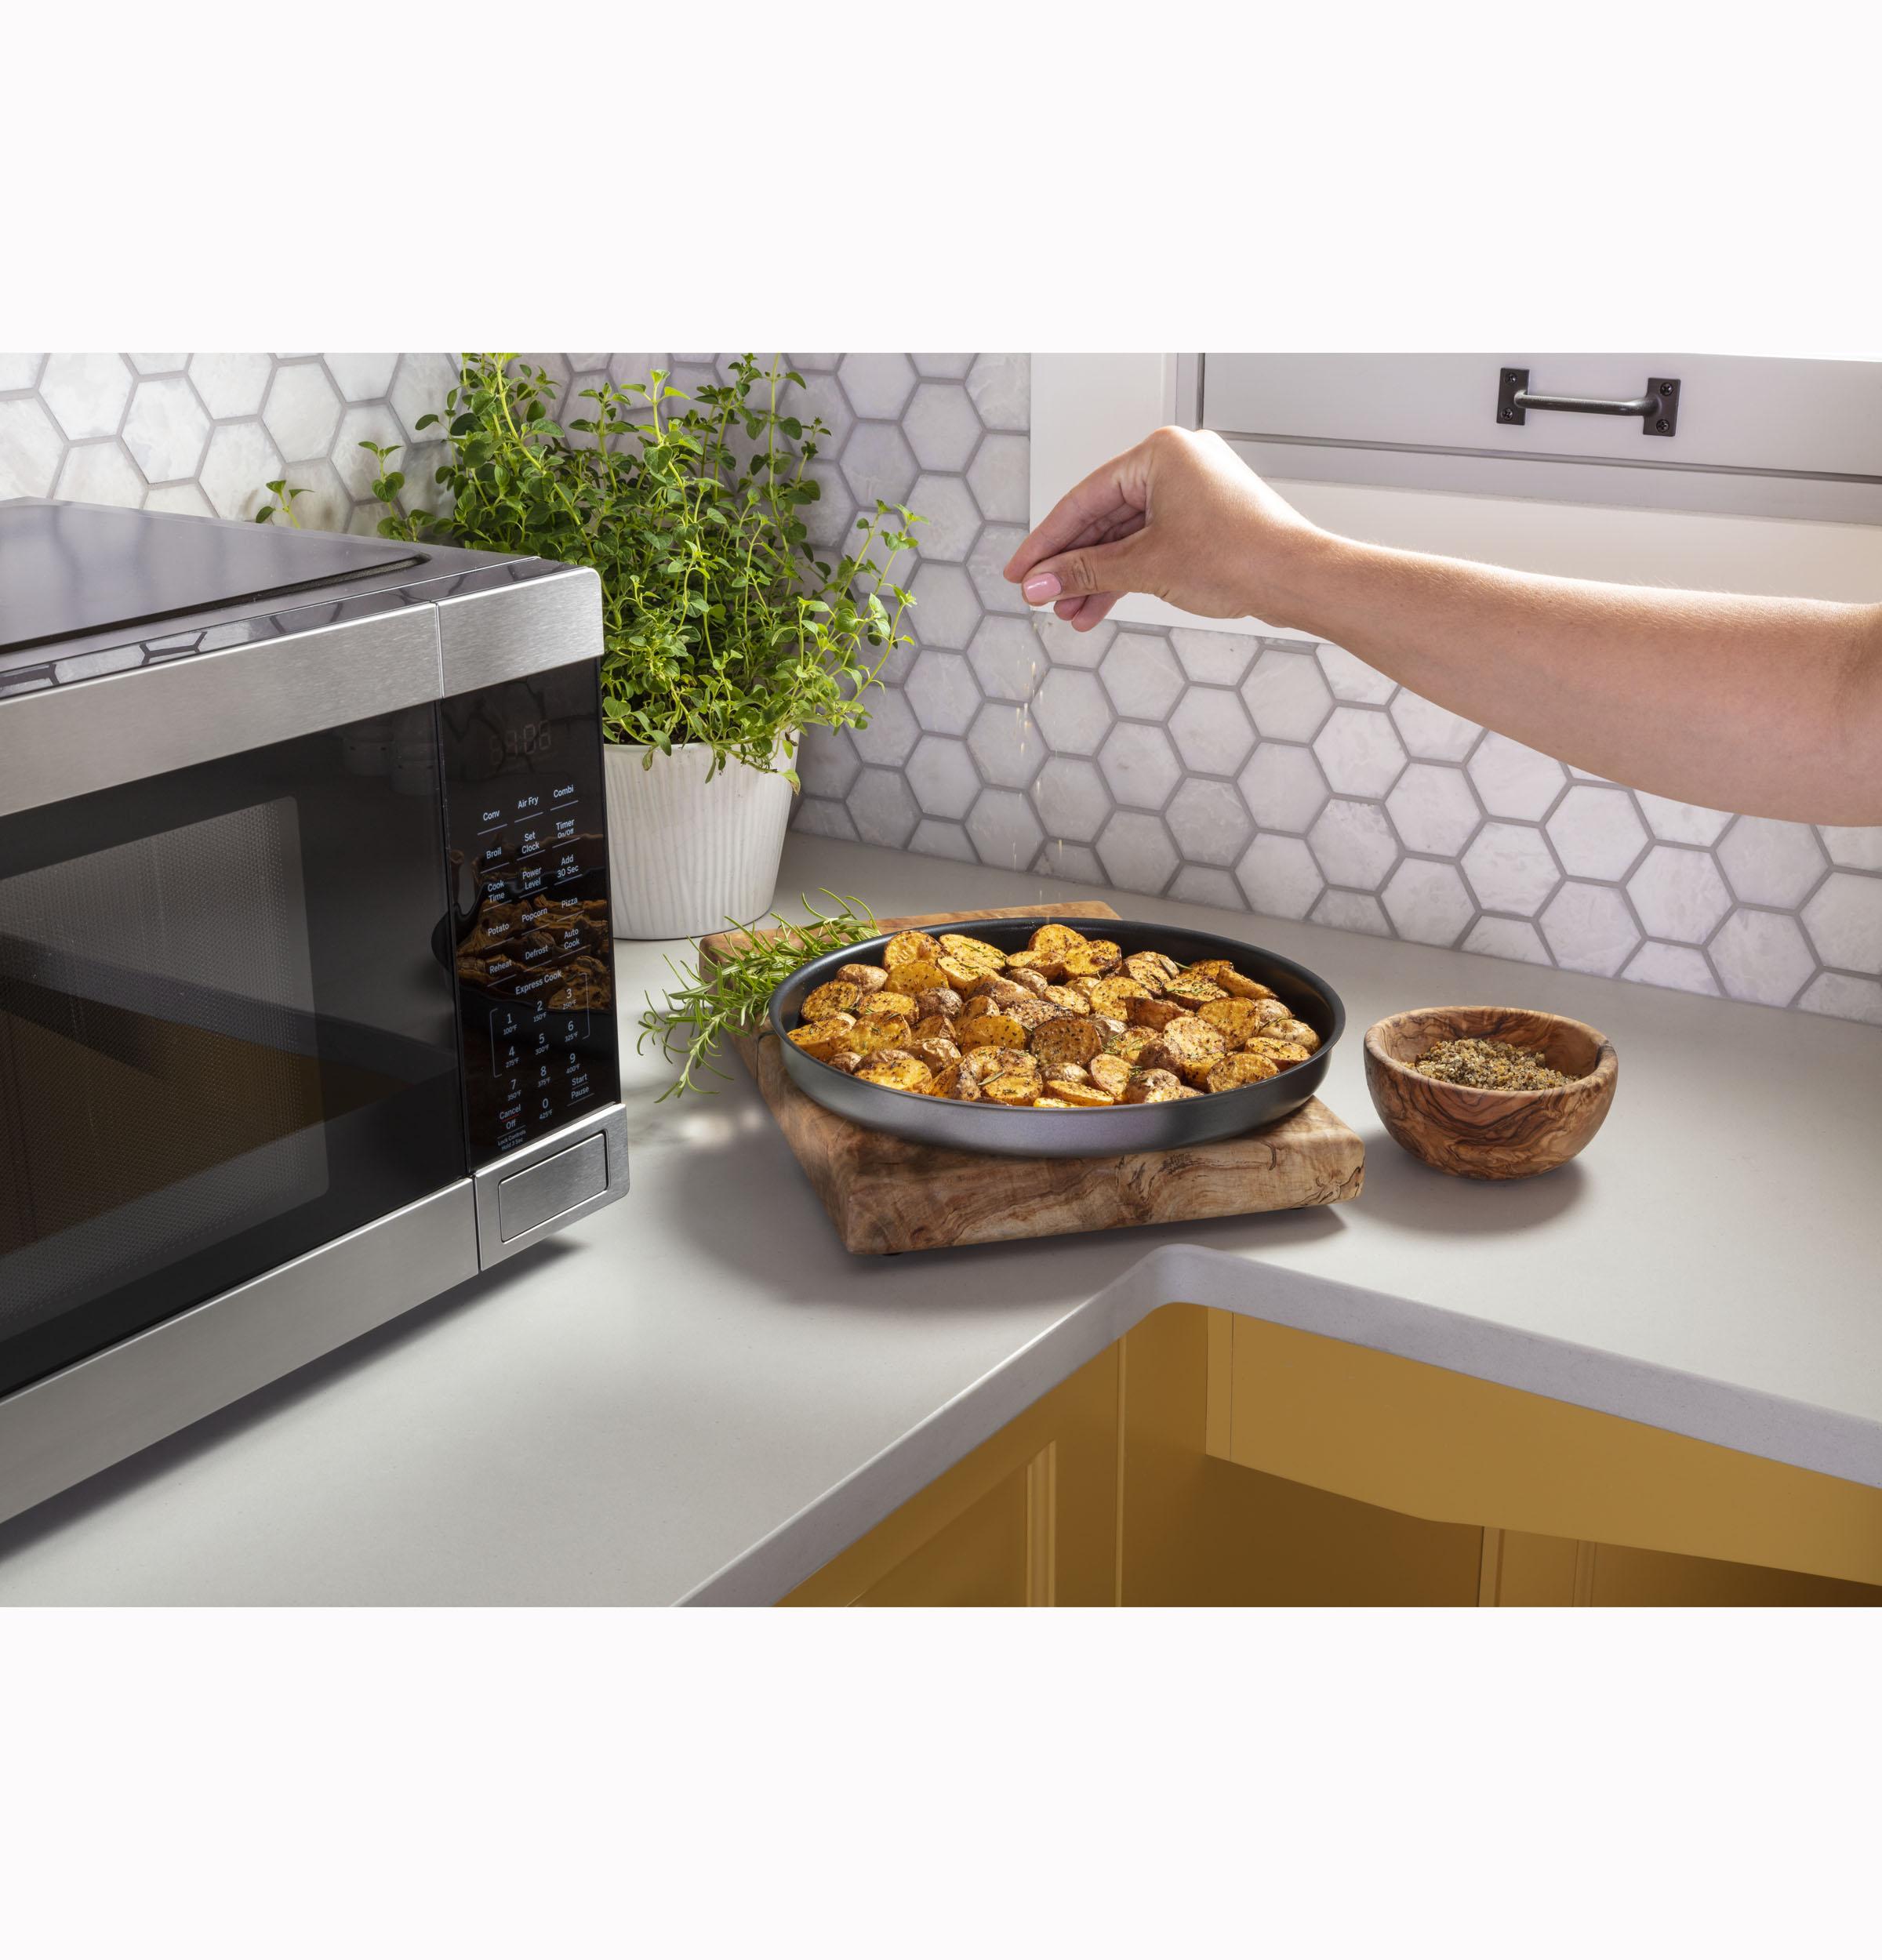 GE Appliances Countertop Microwave with Air Fryer 